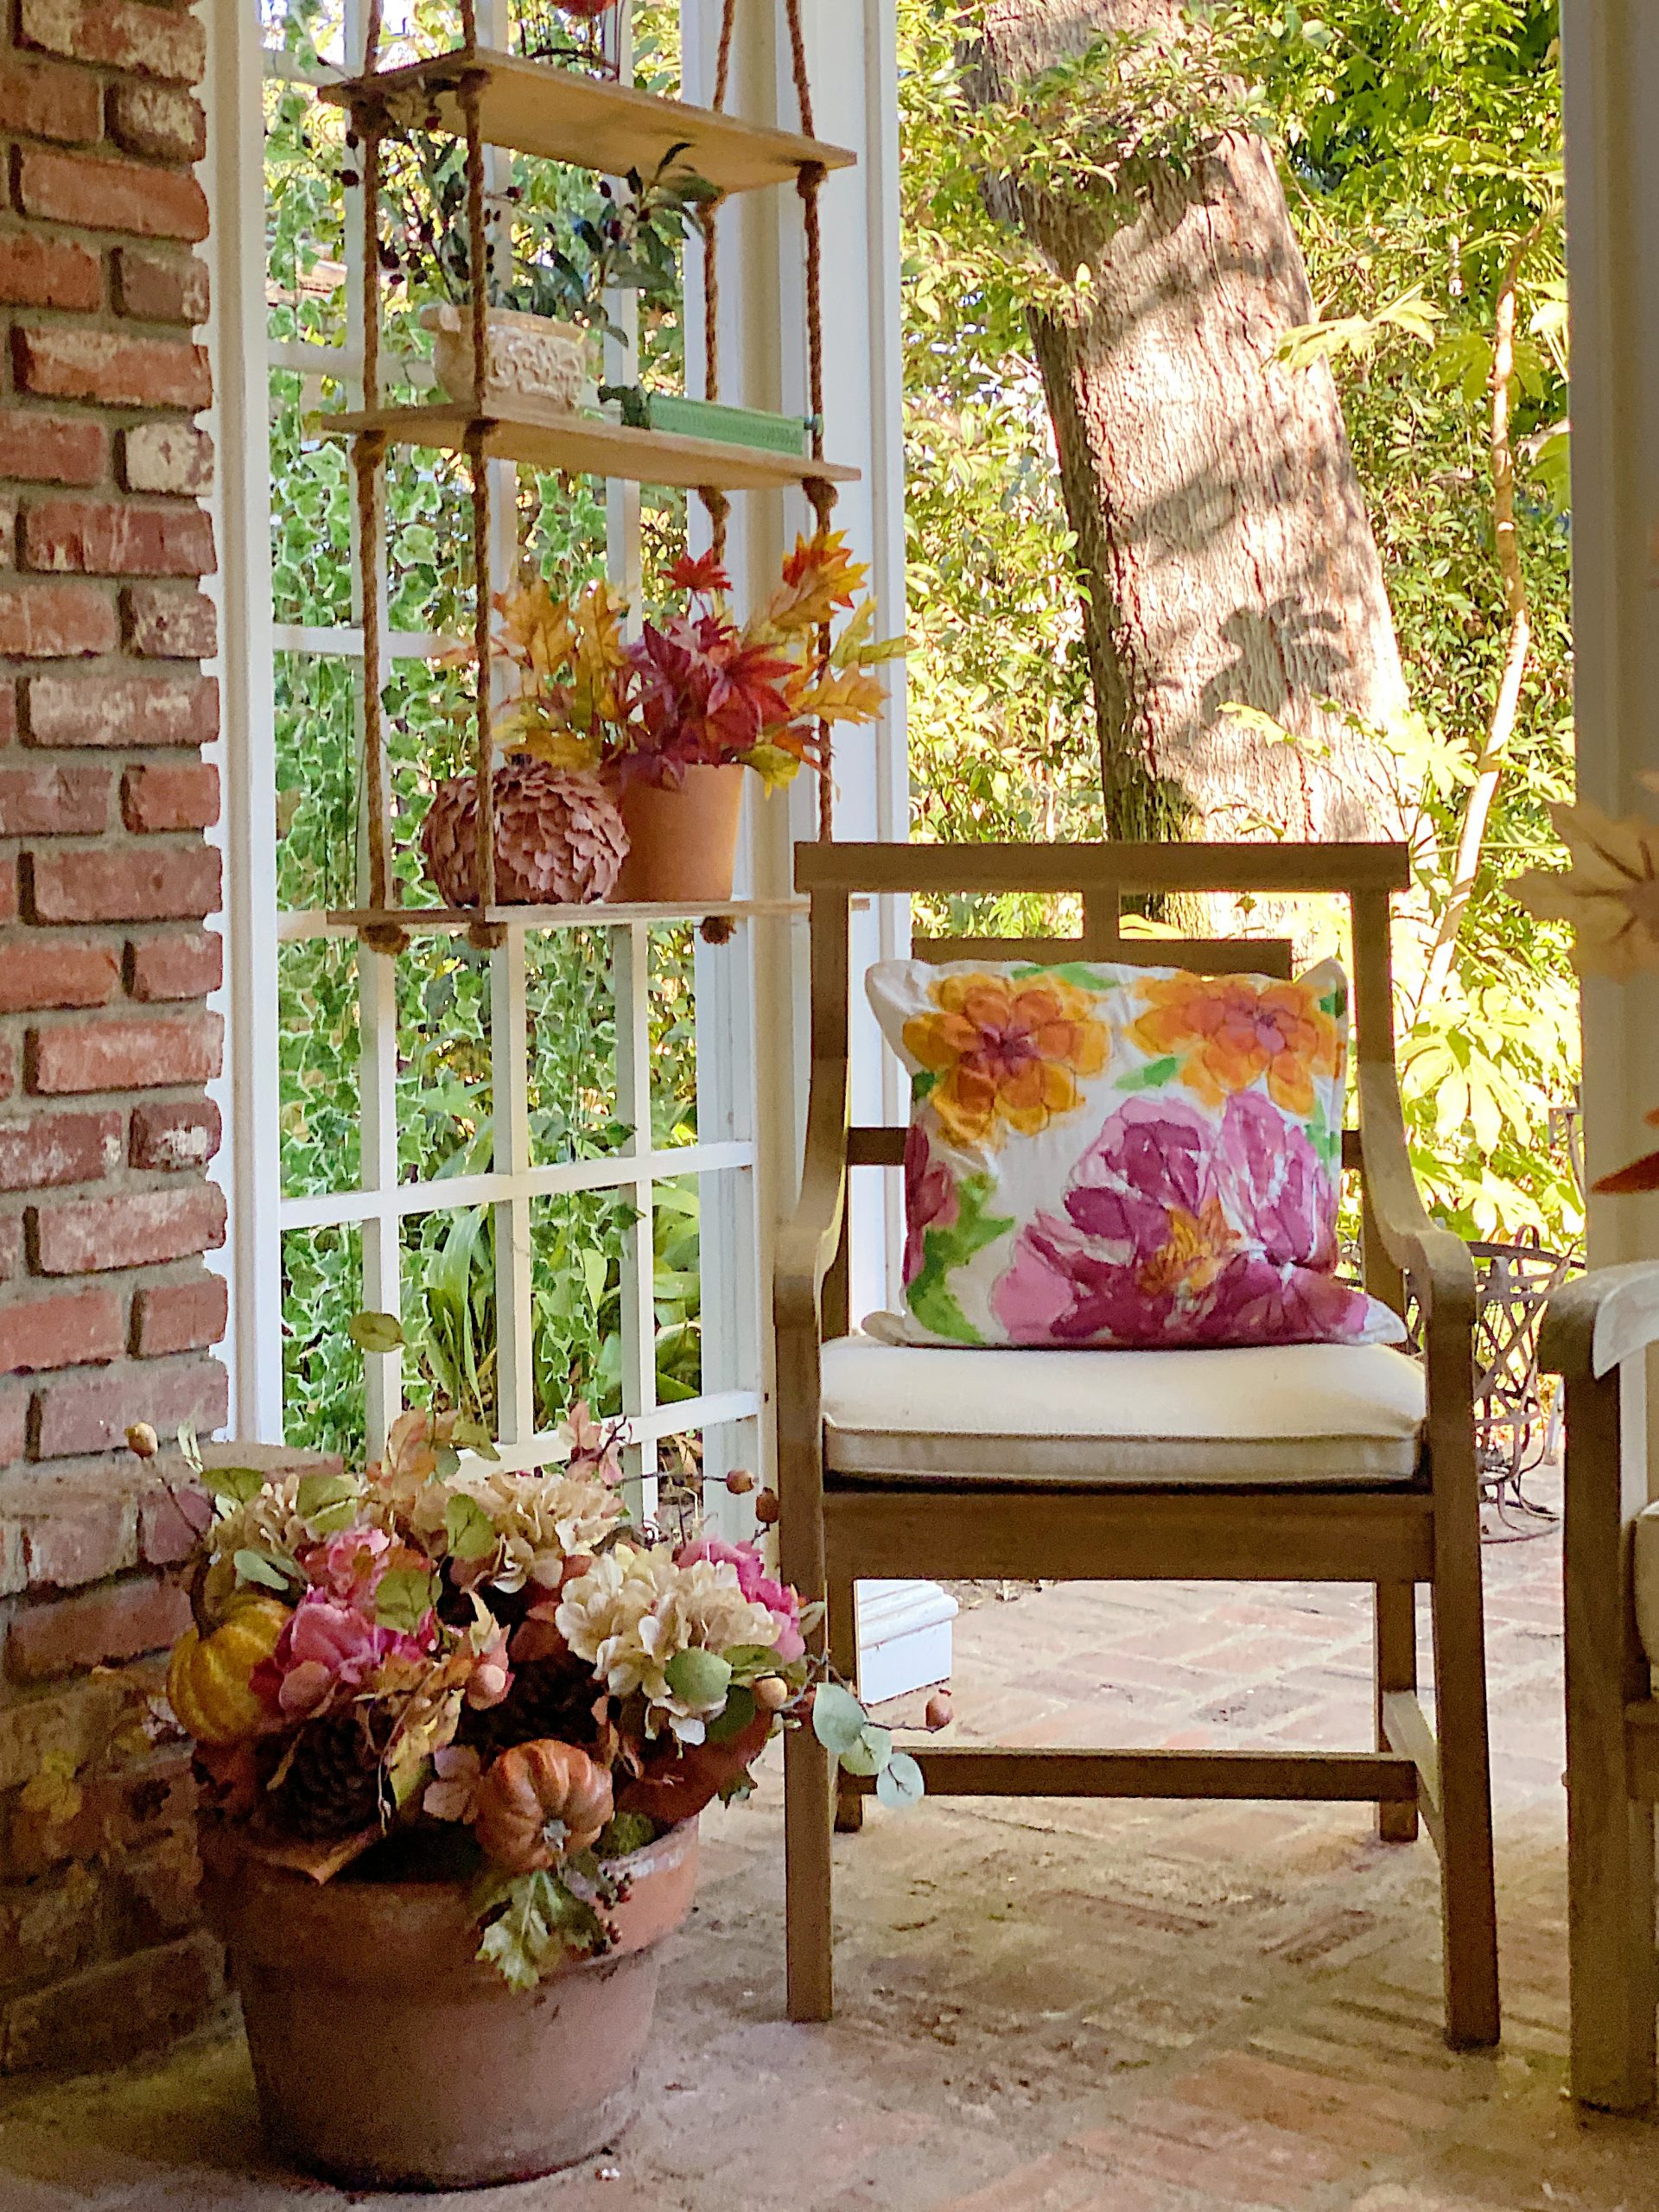 How to Decorate Your Home with Outdoor Fall Decor 1